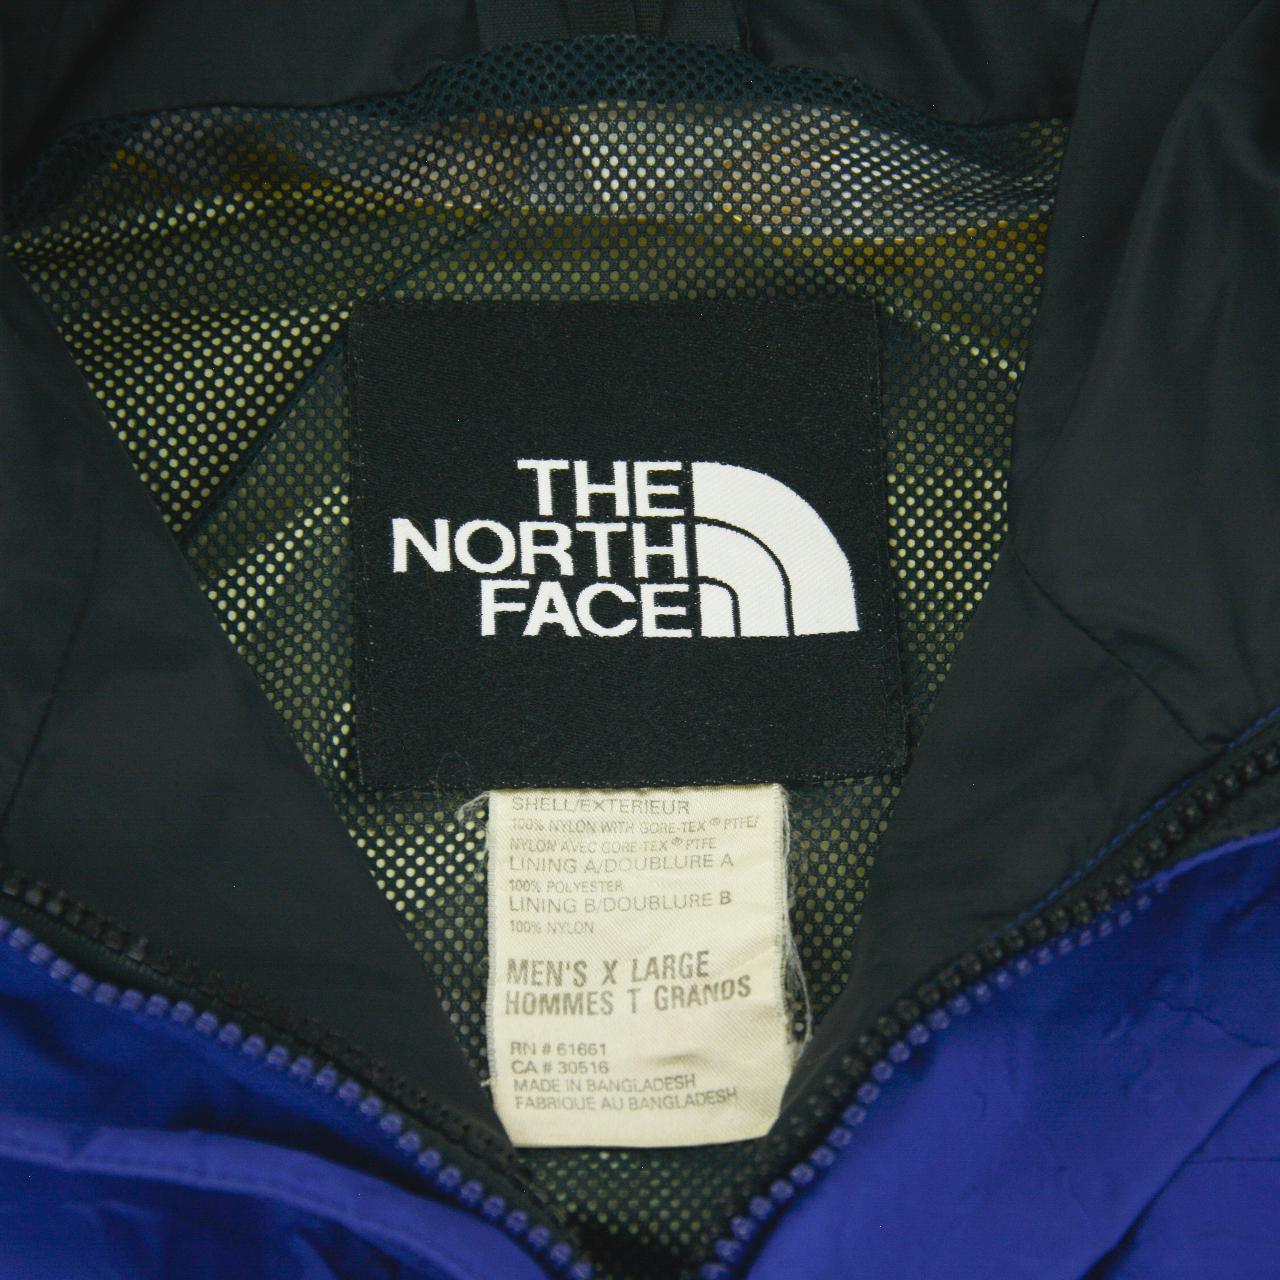 Vintage The North Face Goretex Jacket Size XL - Known Source